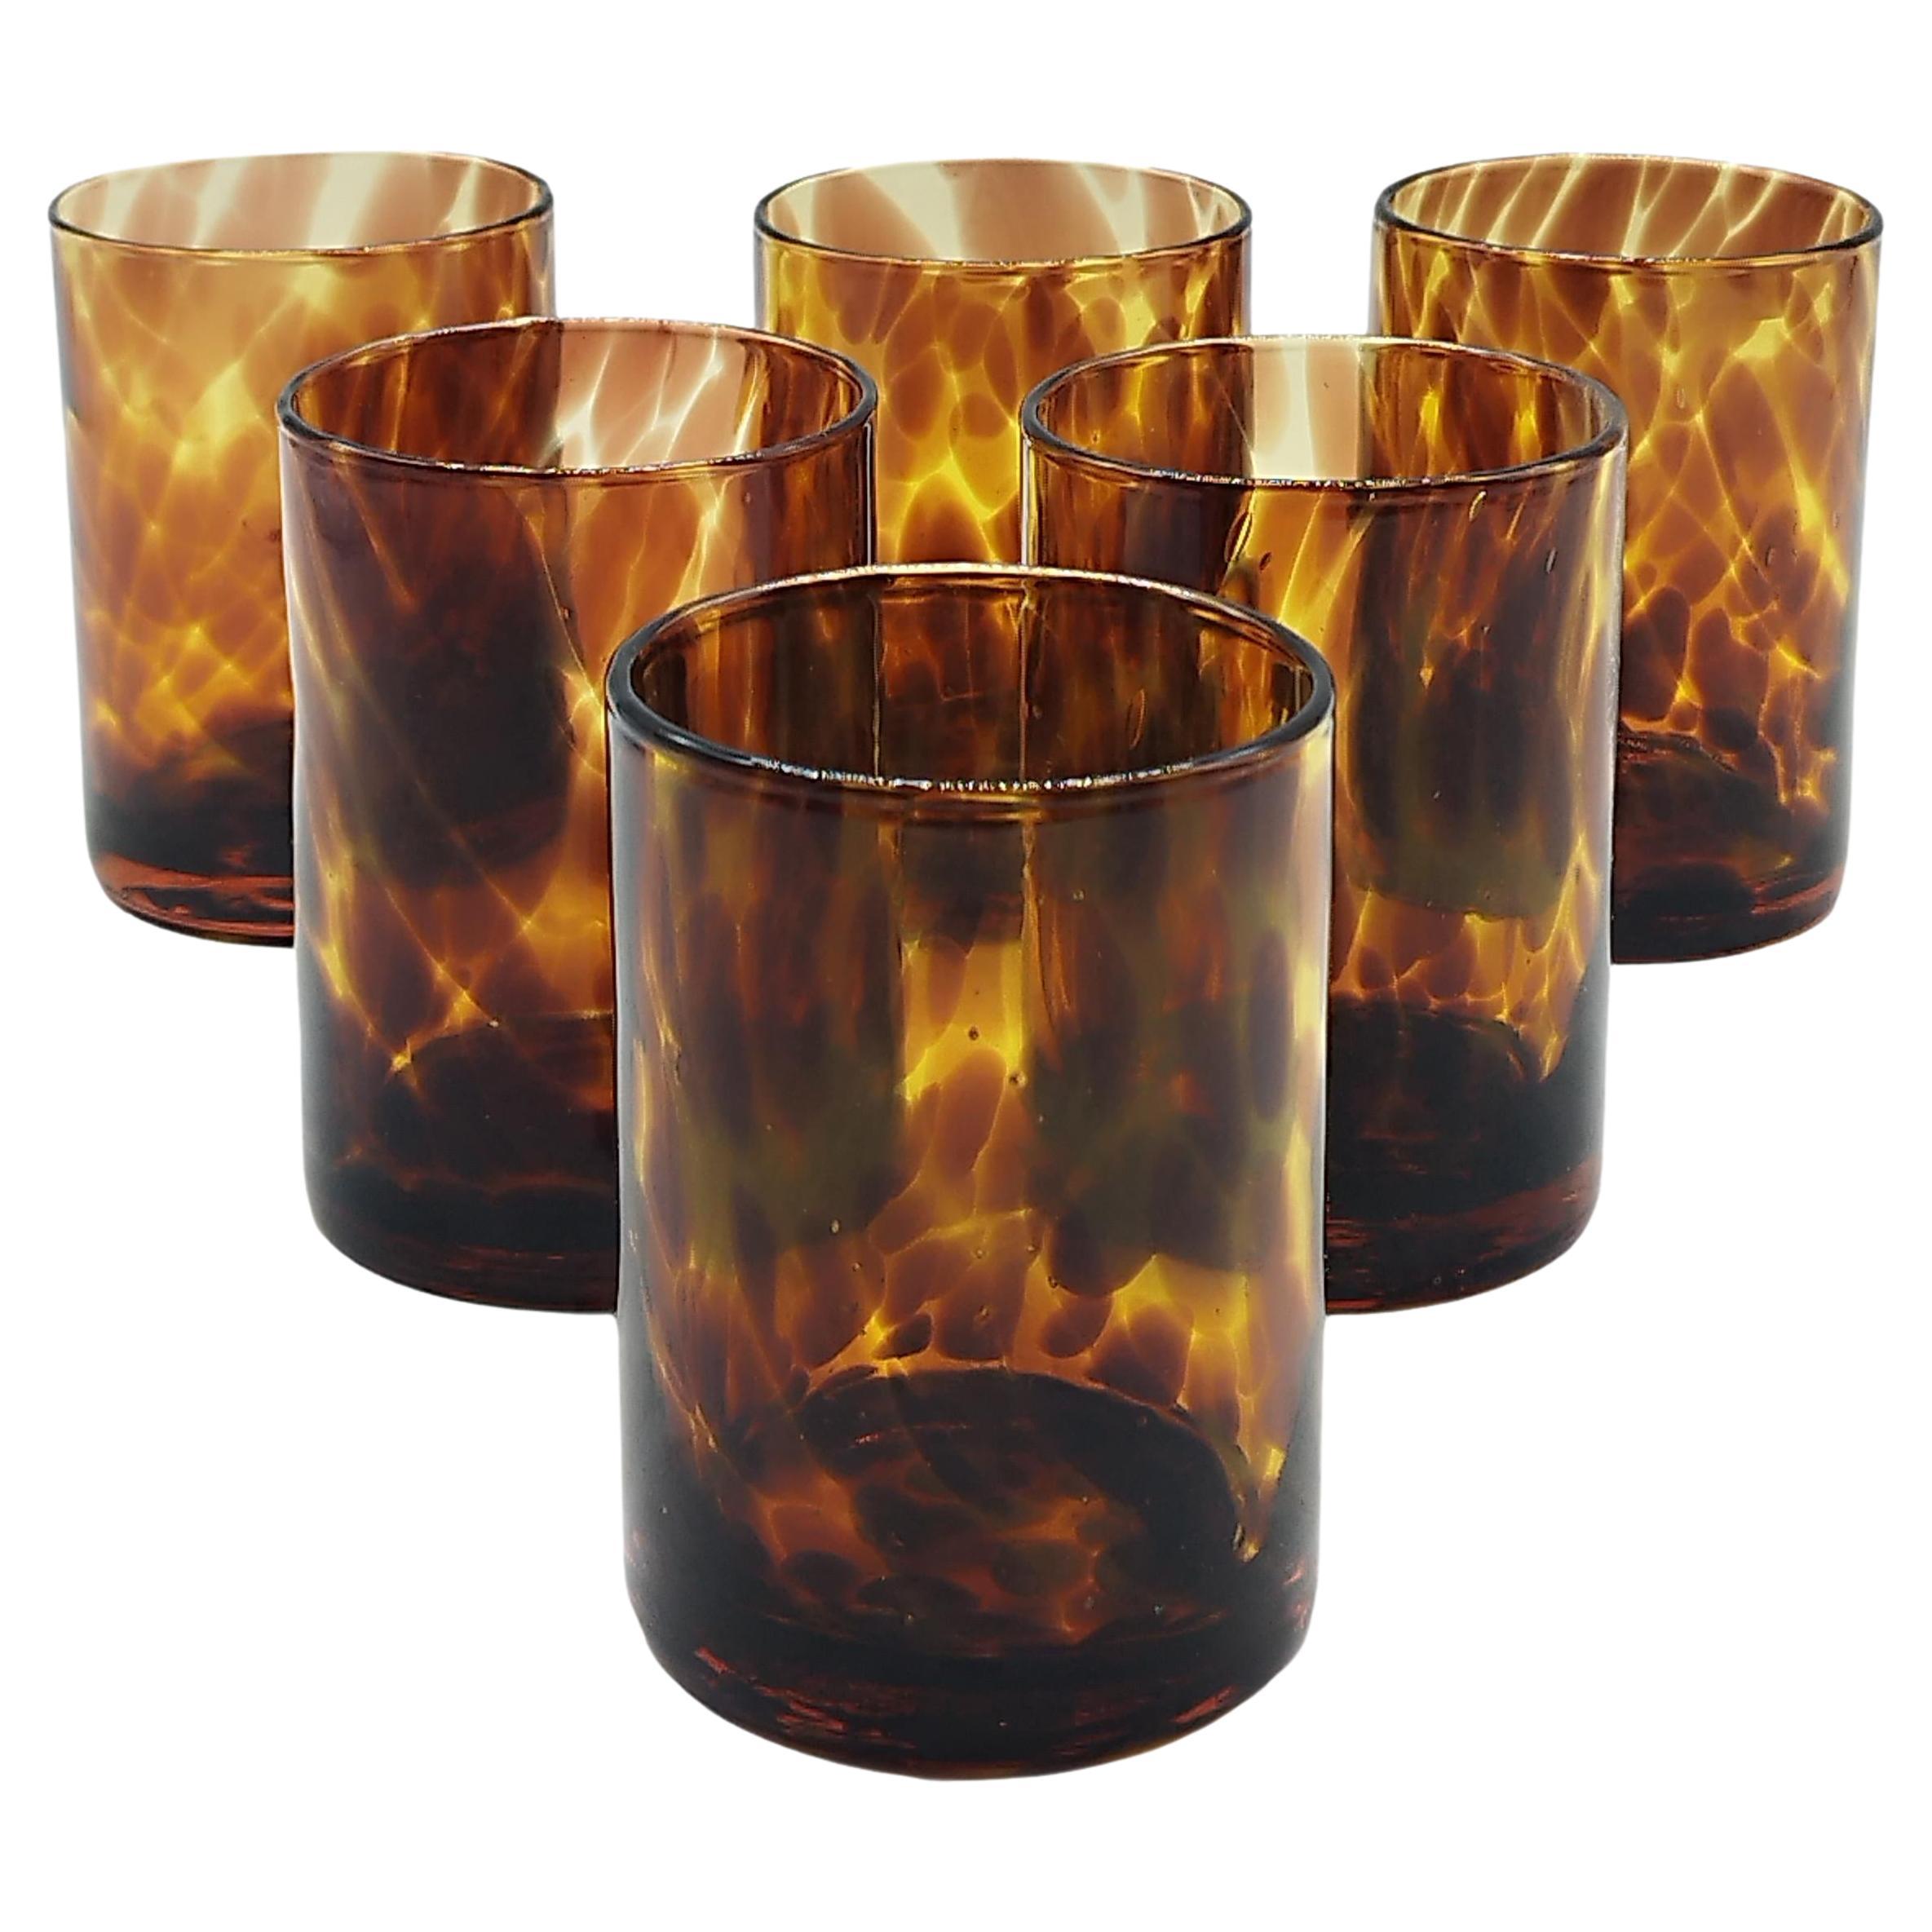 Barovier & Toso Amber Tortoise Shell Drinking Glasses Set of Six, Italy 1970s